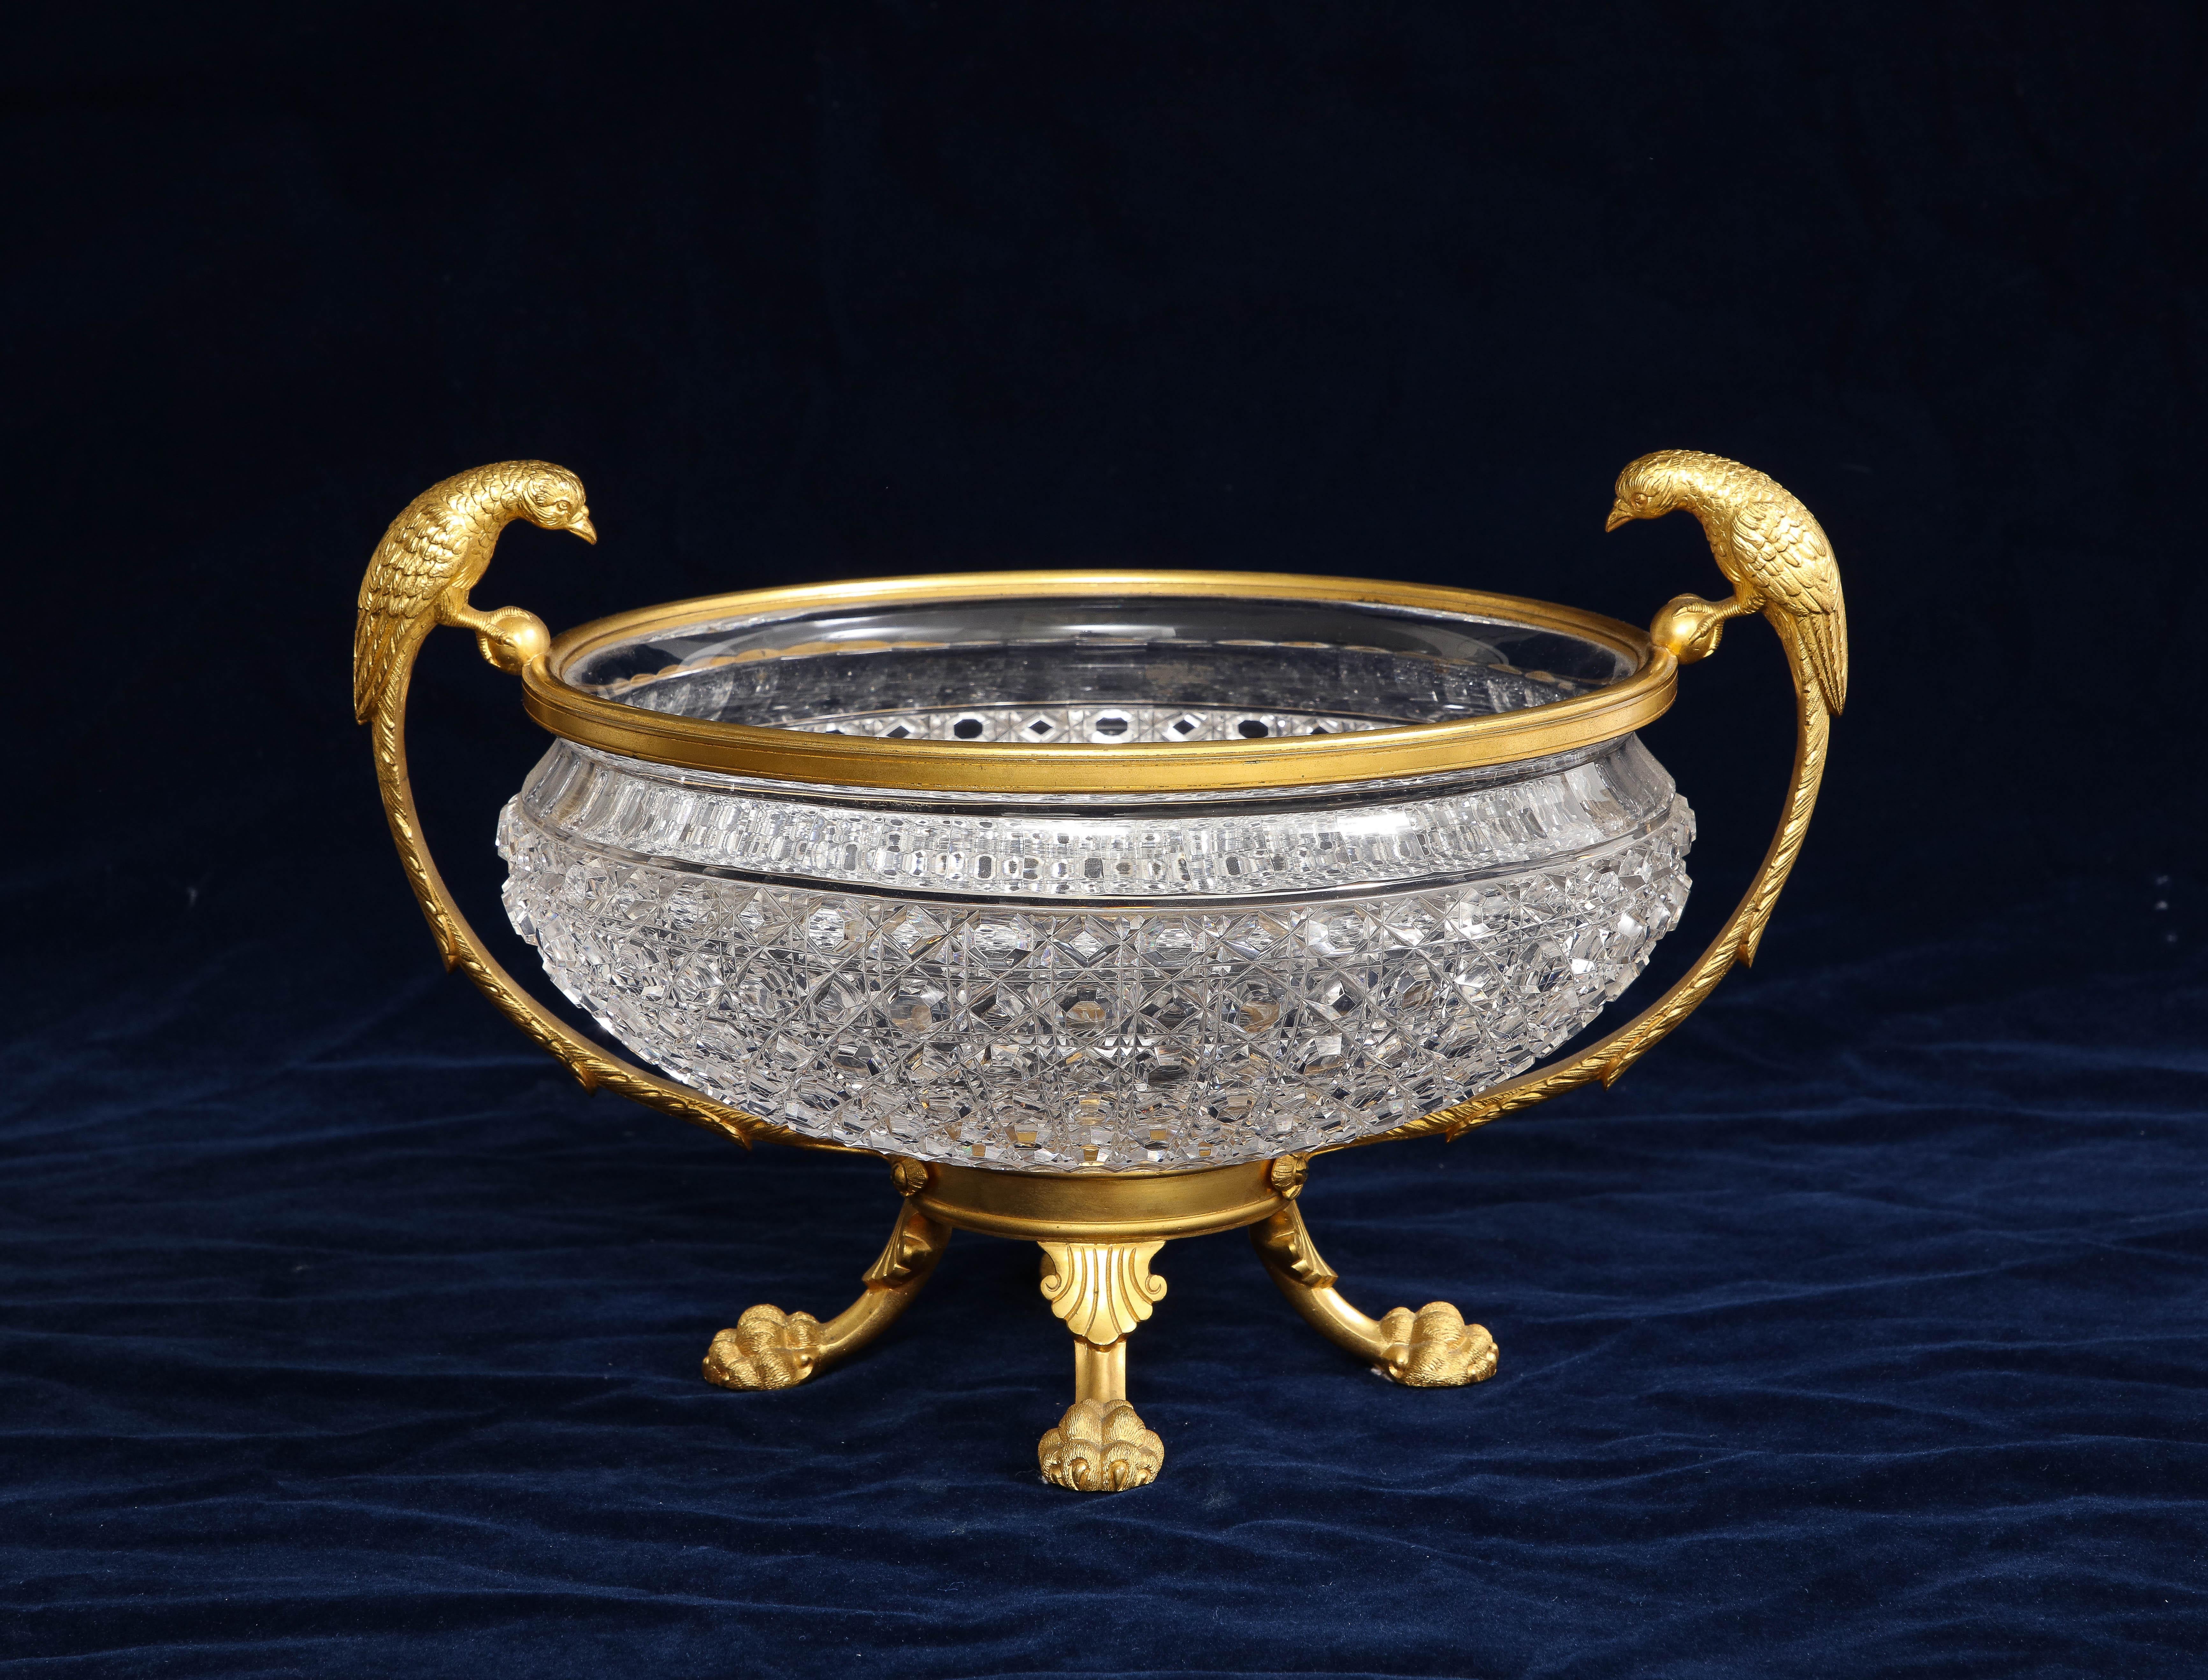 A marvelous 19th century English Dore bronze mounted crystal bowl centerpiece with dore bronze bird handles, signed on the bottom, Osler. The crystal bowl is beautifully hand carved with meticulous detail. The bowl is further surmounted on the dore